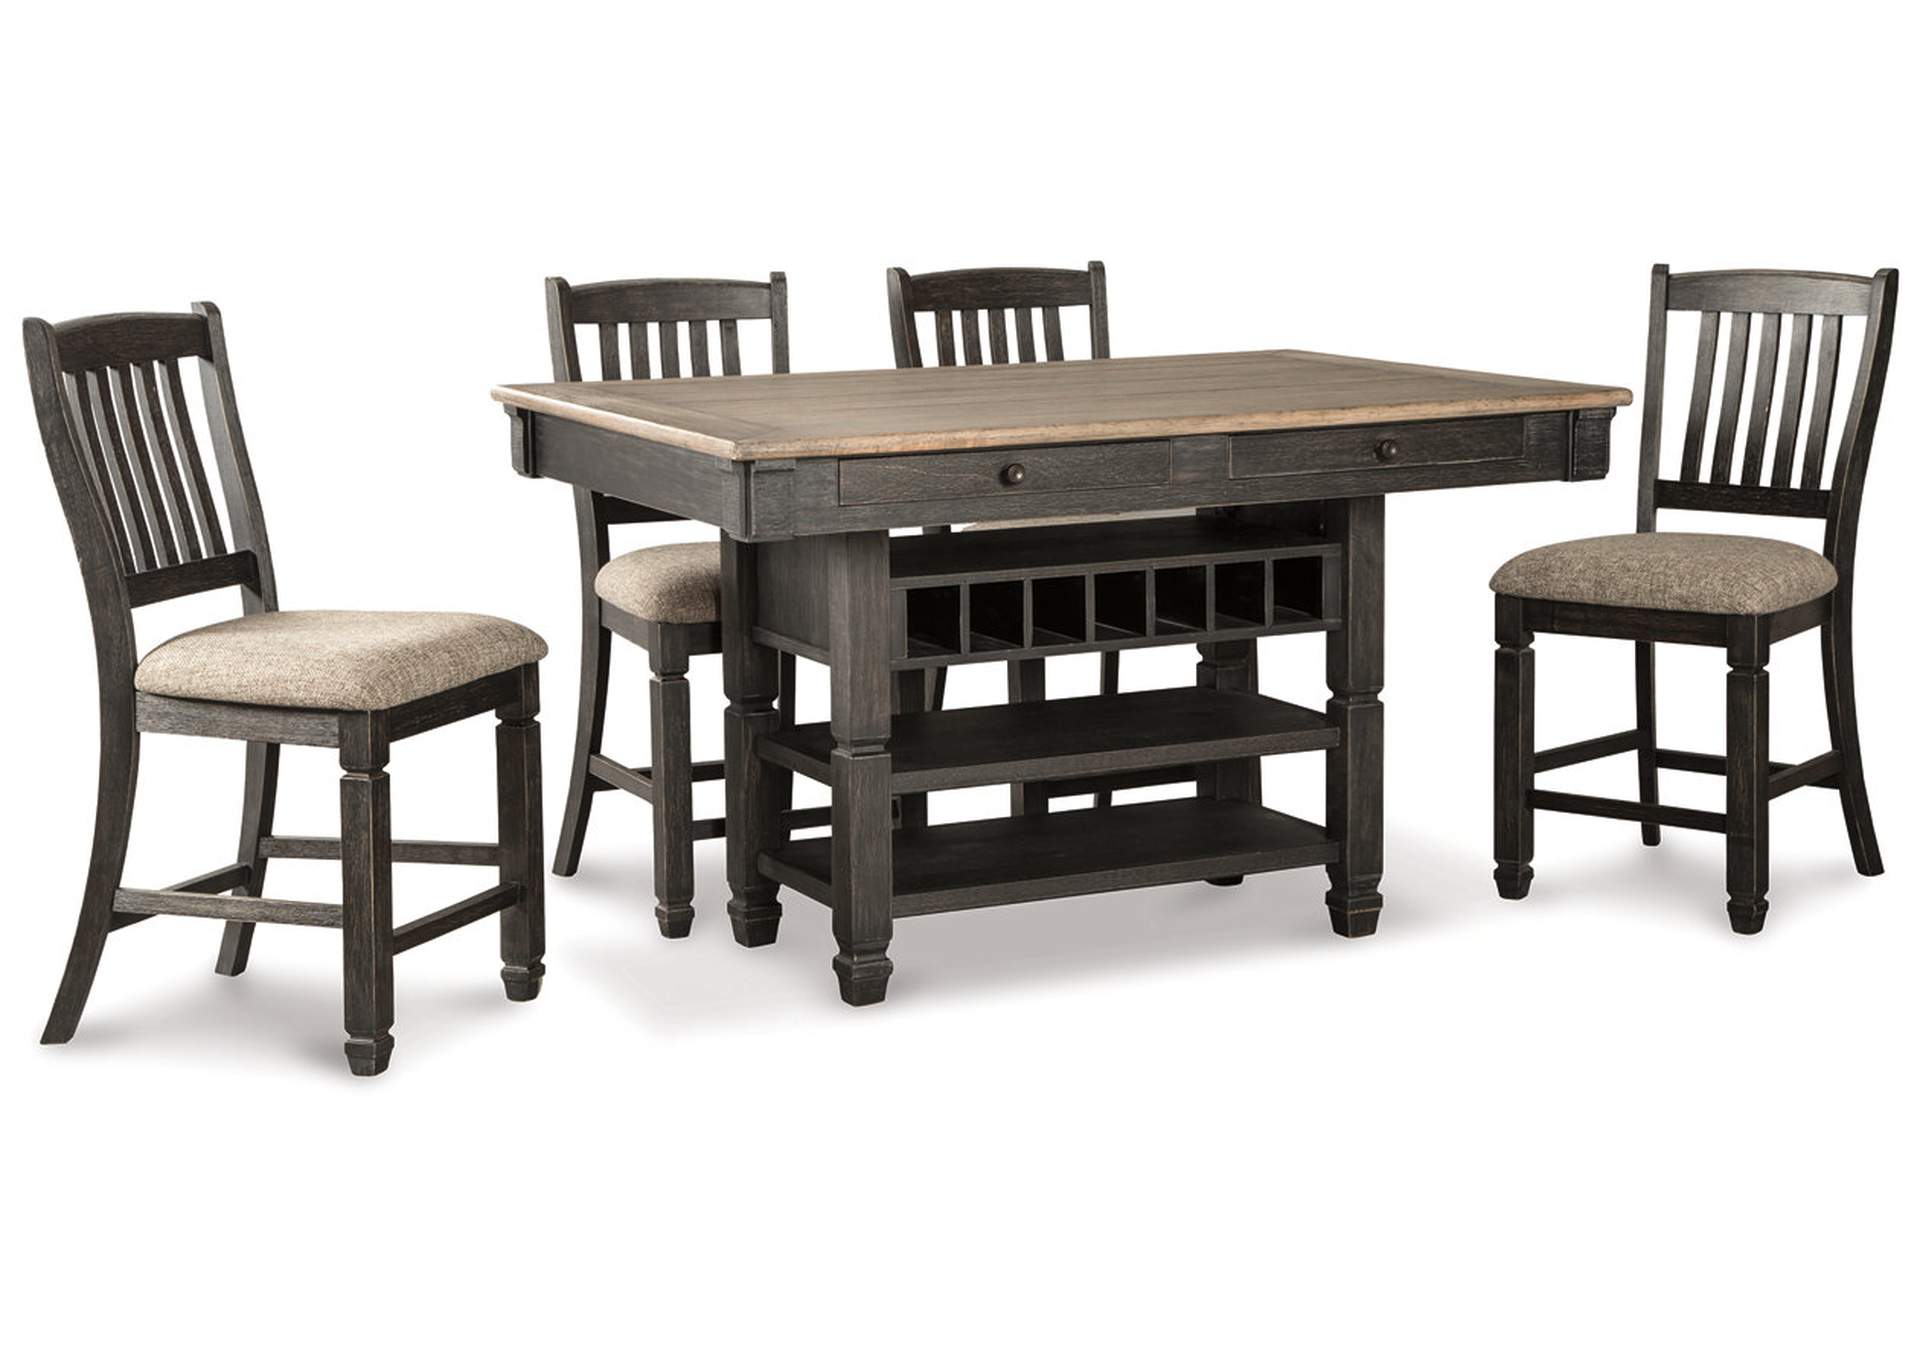 Tyler Creek Counter Height Dining Table and 4 Barstools,Signature Design By Ashley